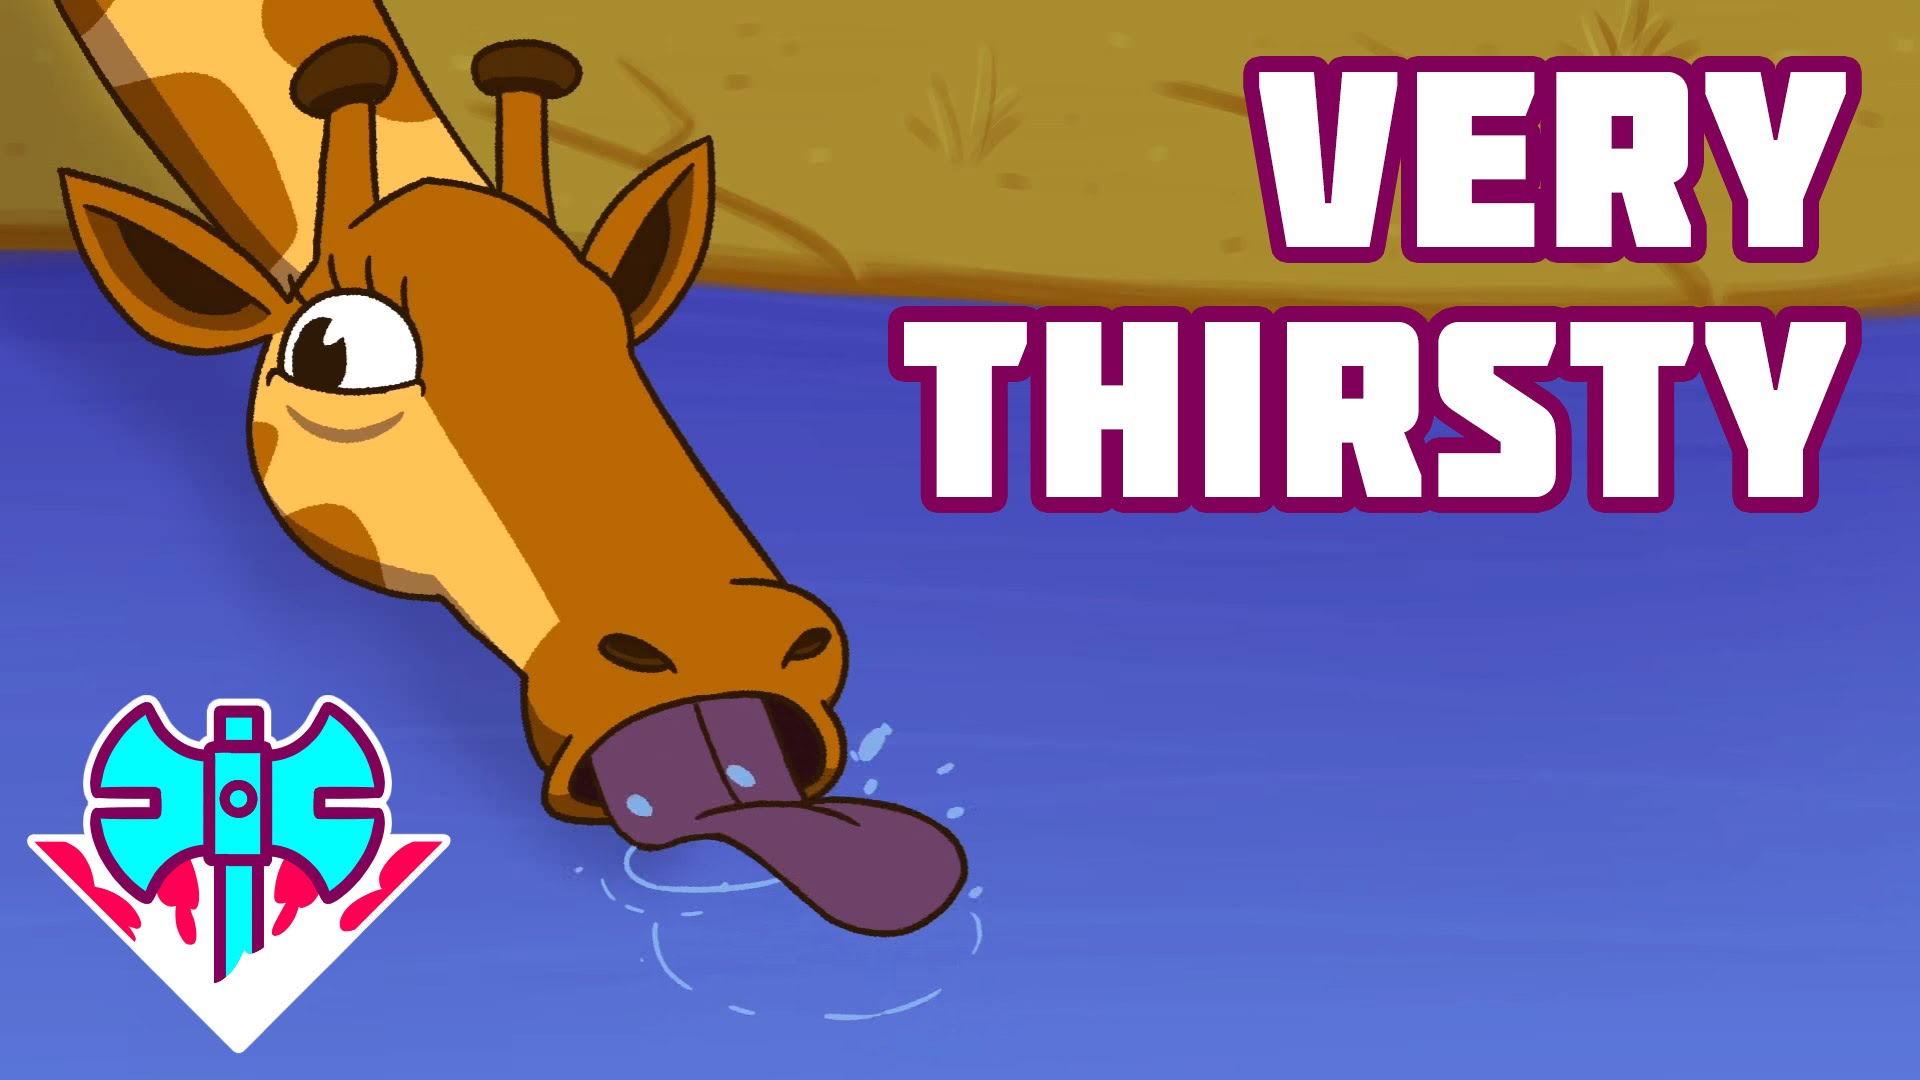 Is was very thirsty. Thirsty. Very thirsty. Nick thirsty. Hot animals thirsty.